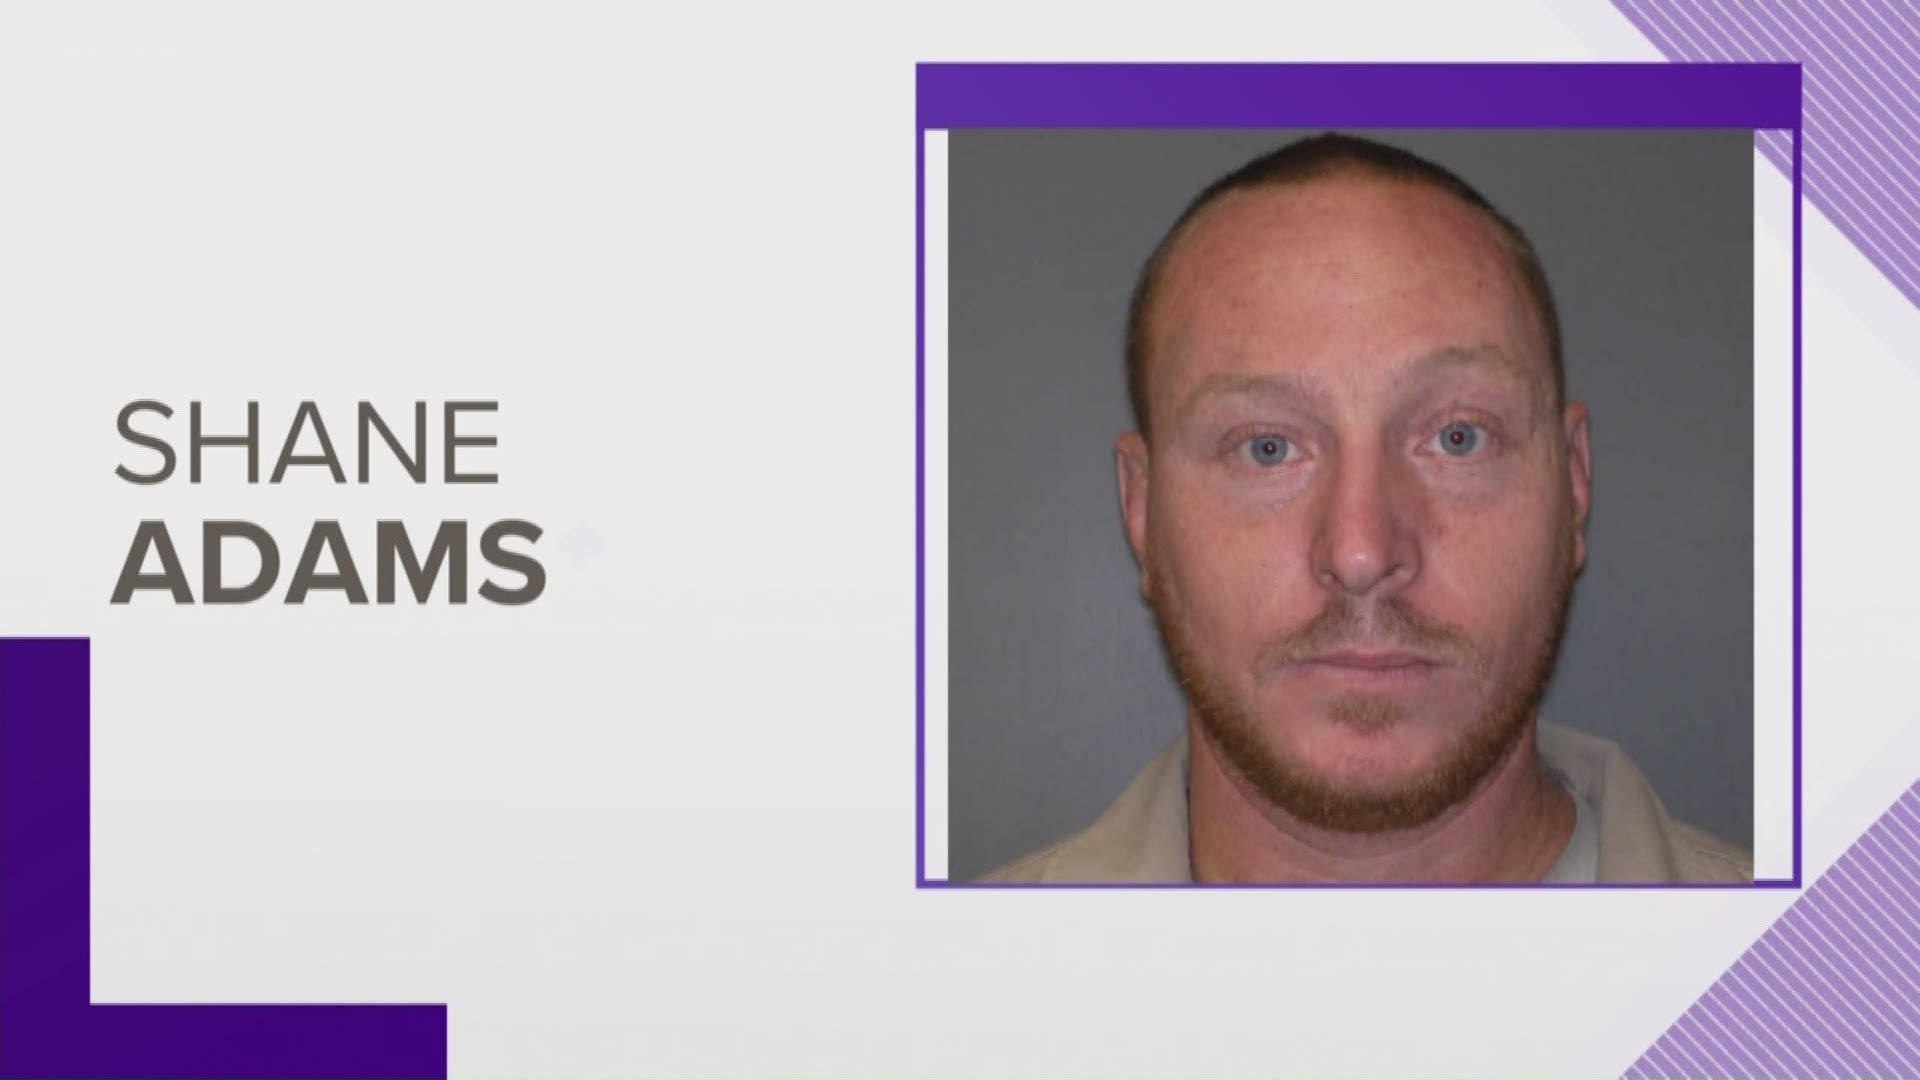 Shane Adams, 39, walked away from the Livesay pre-release center in Spartanburg.